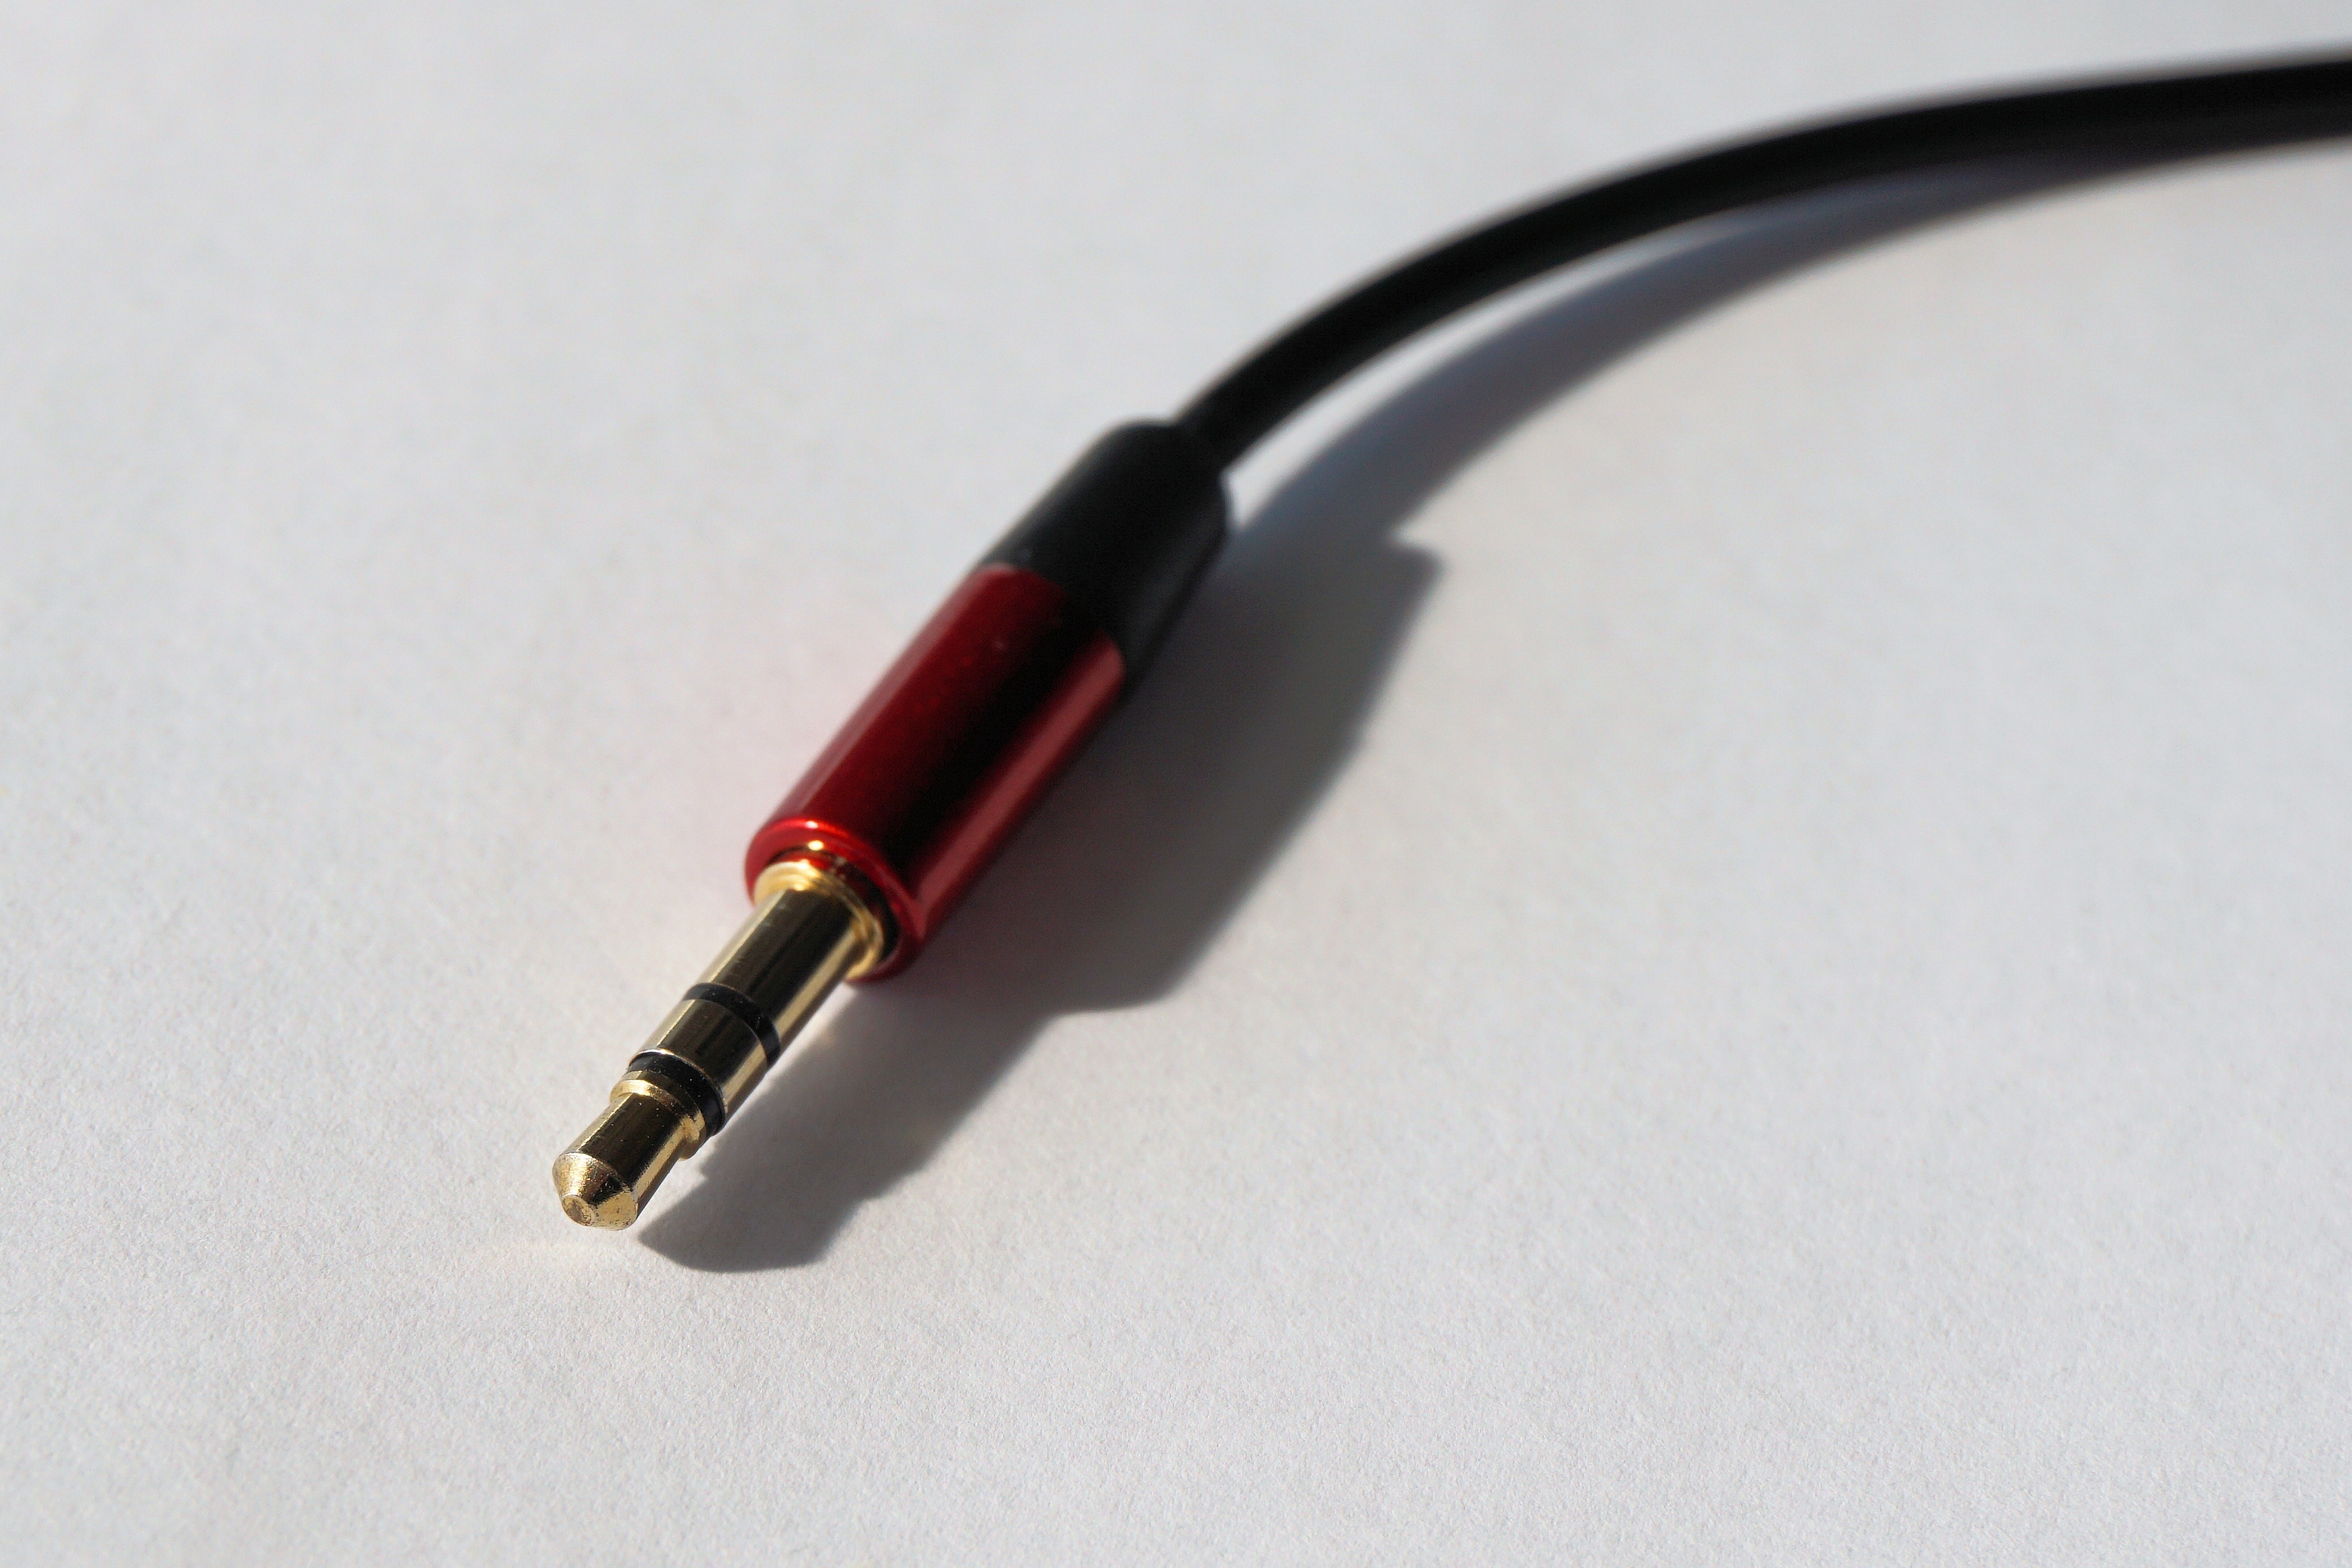 red and black audio cable